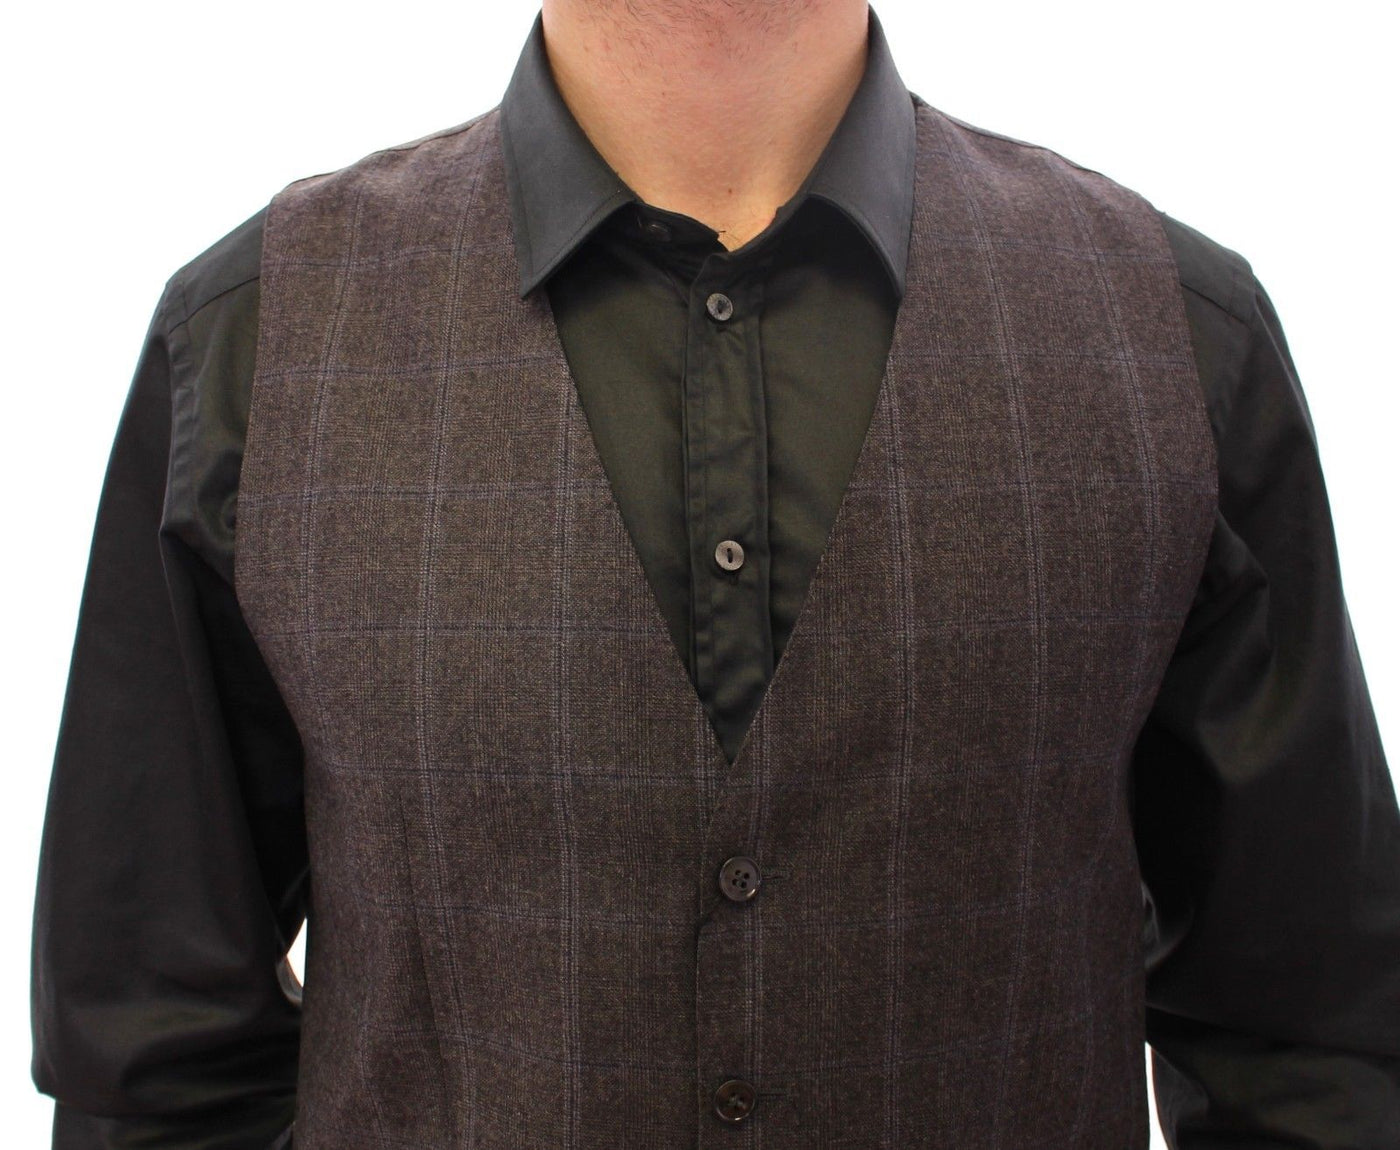 Dolce & Gabbana Brown Check Wool Single Breasted Vest